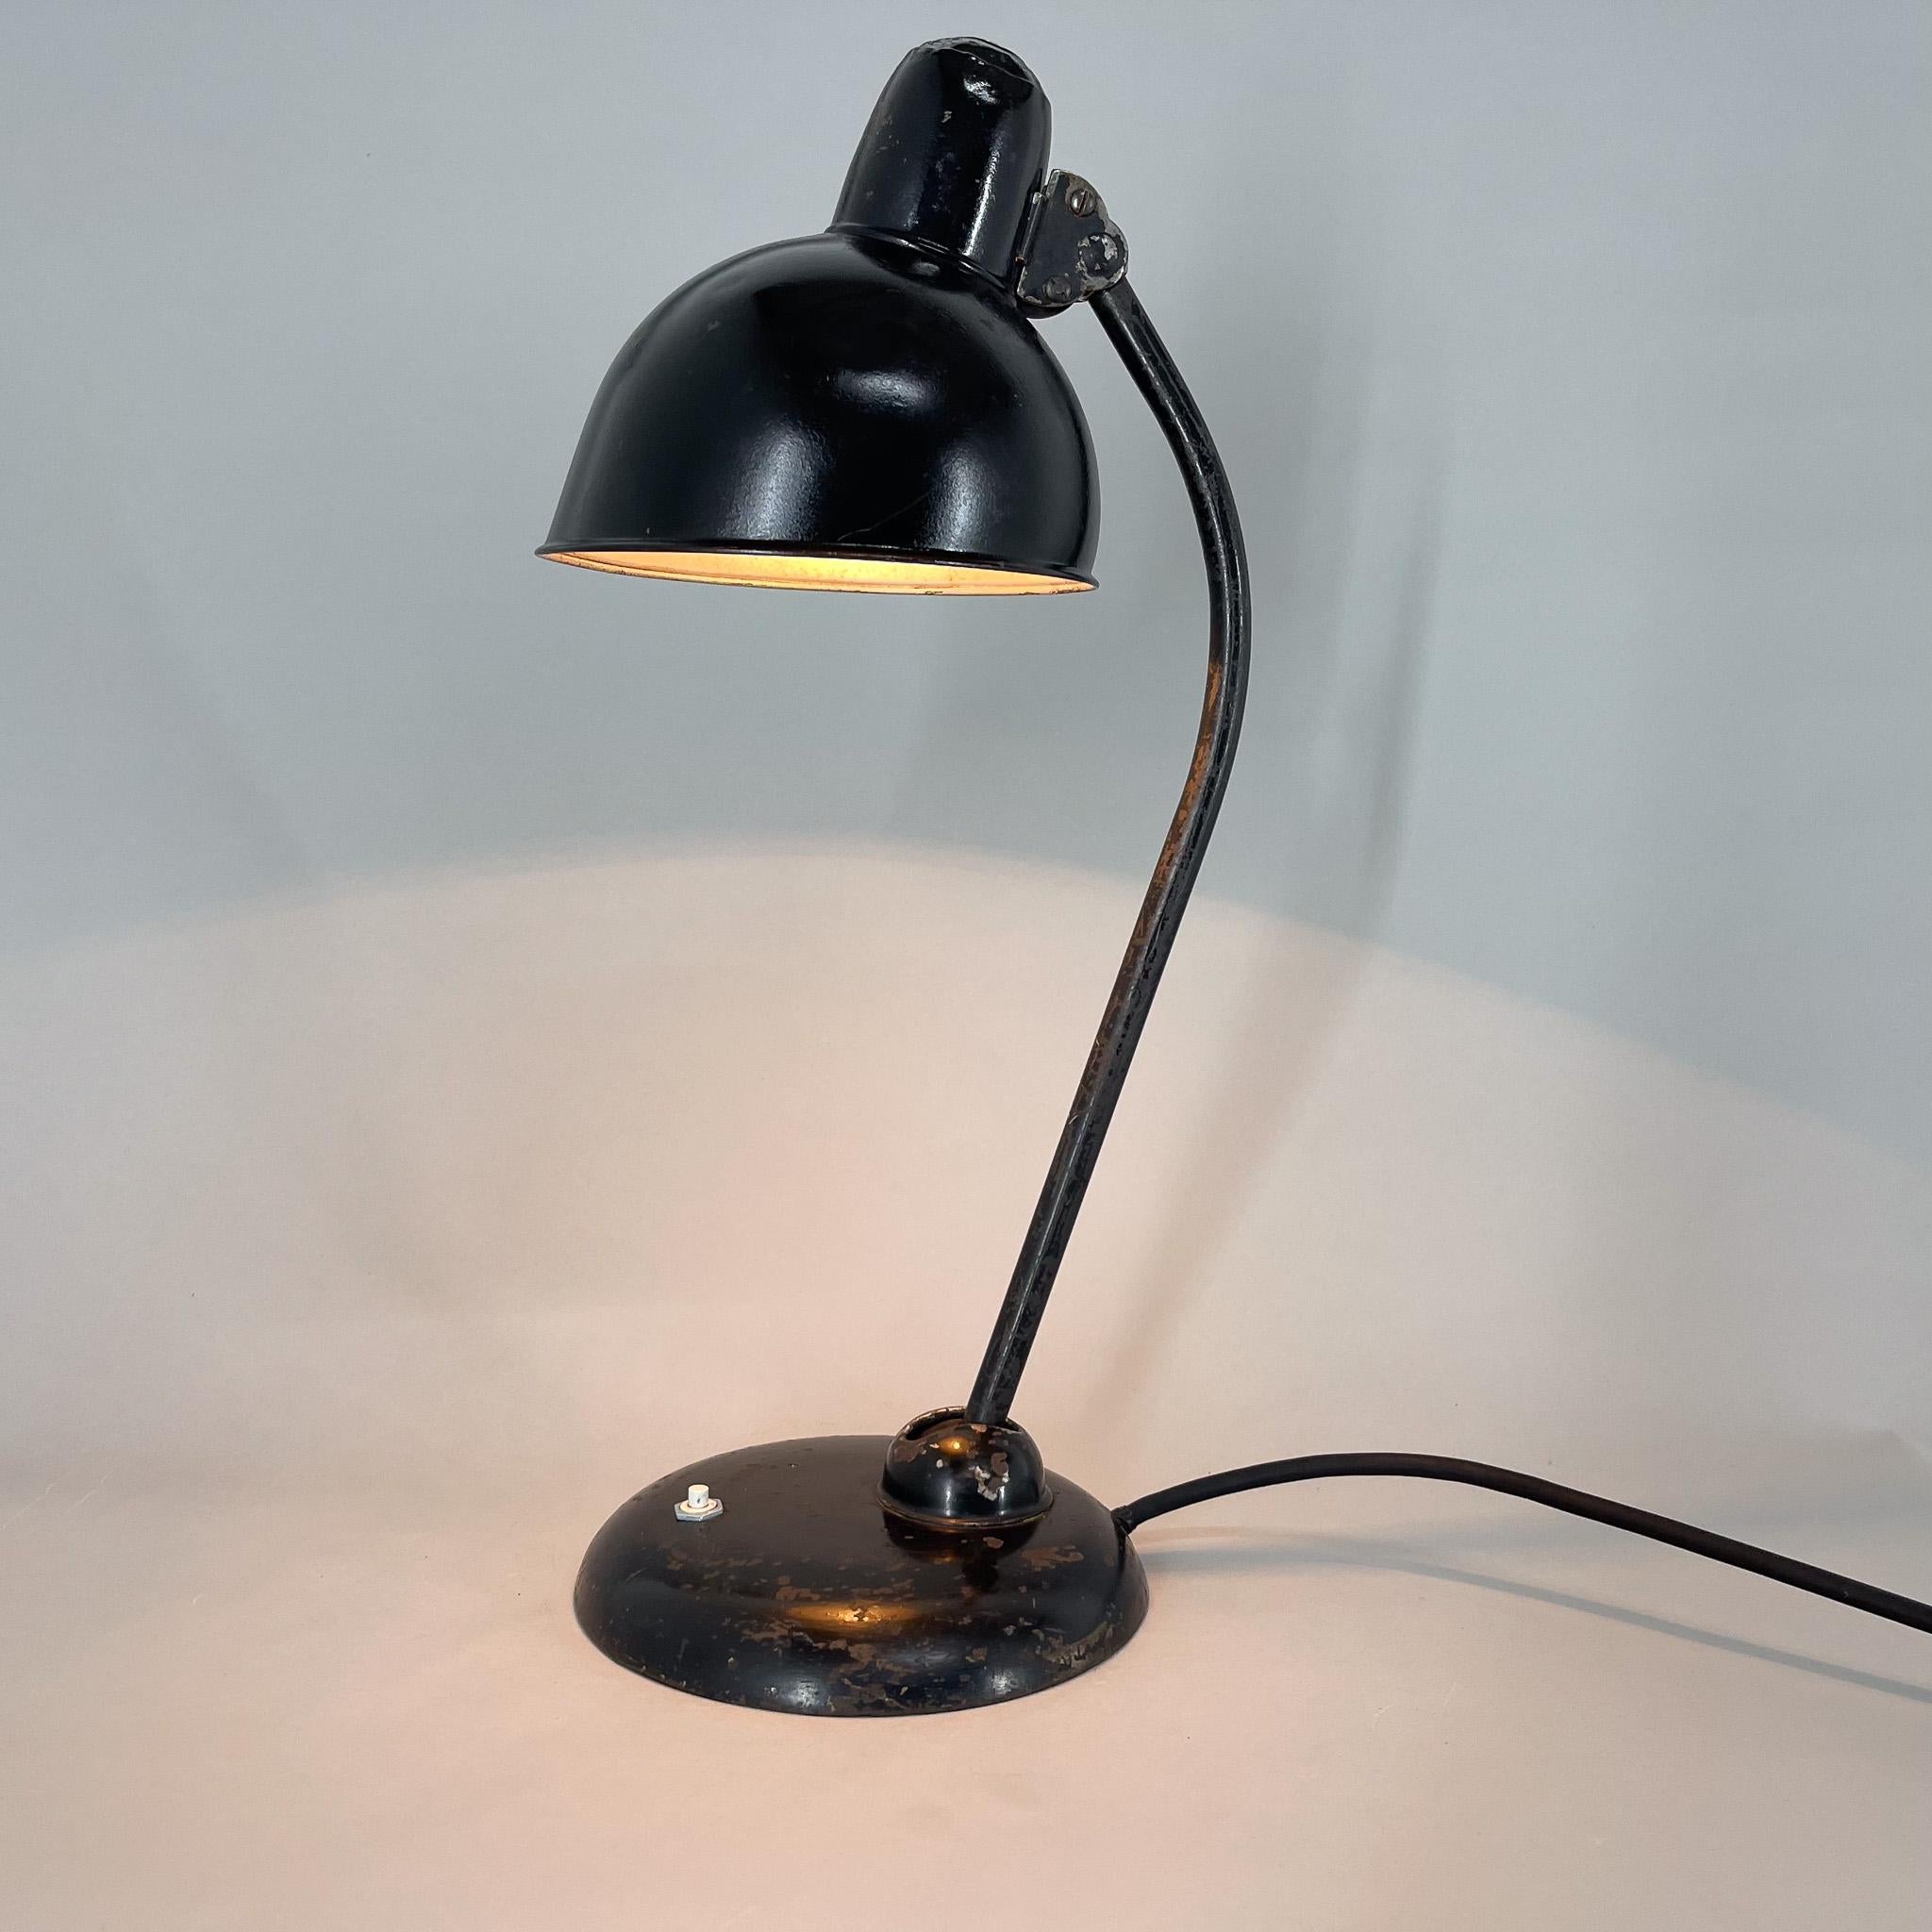 Vintage table metal table lamp with adjustable arm and shade, designed by Christian Dell for Kaiser. Bulb: 1 x E26-E27. US plug adapter included.